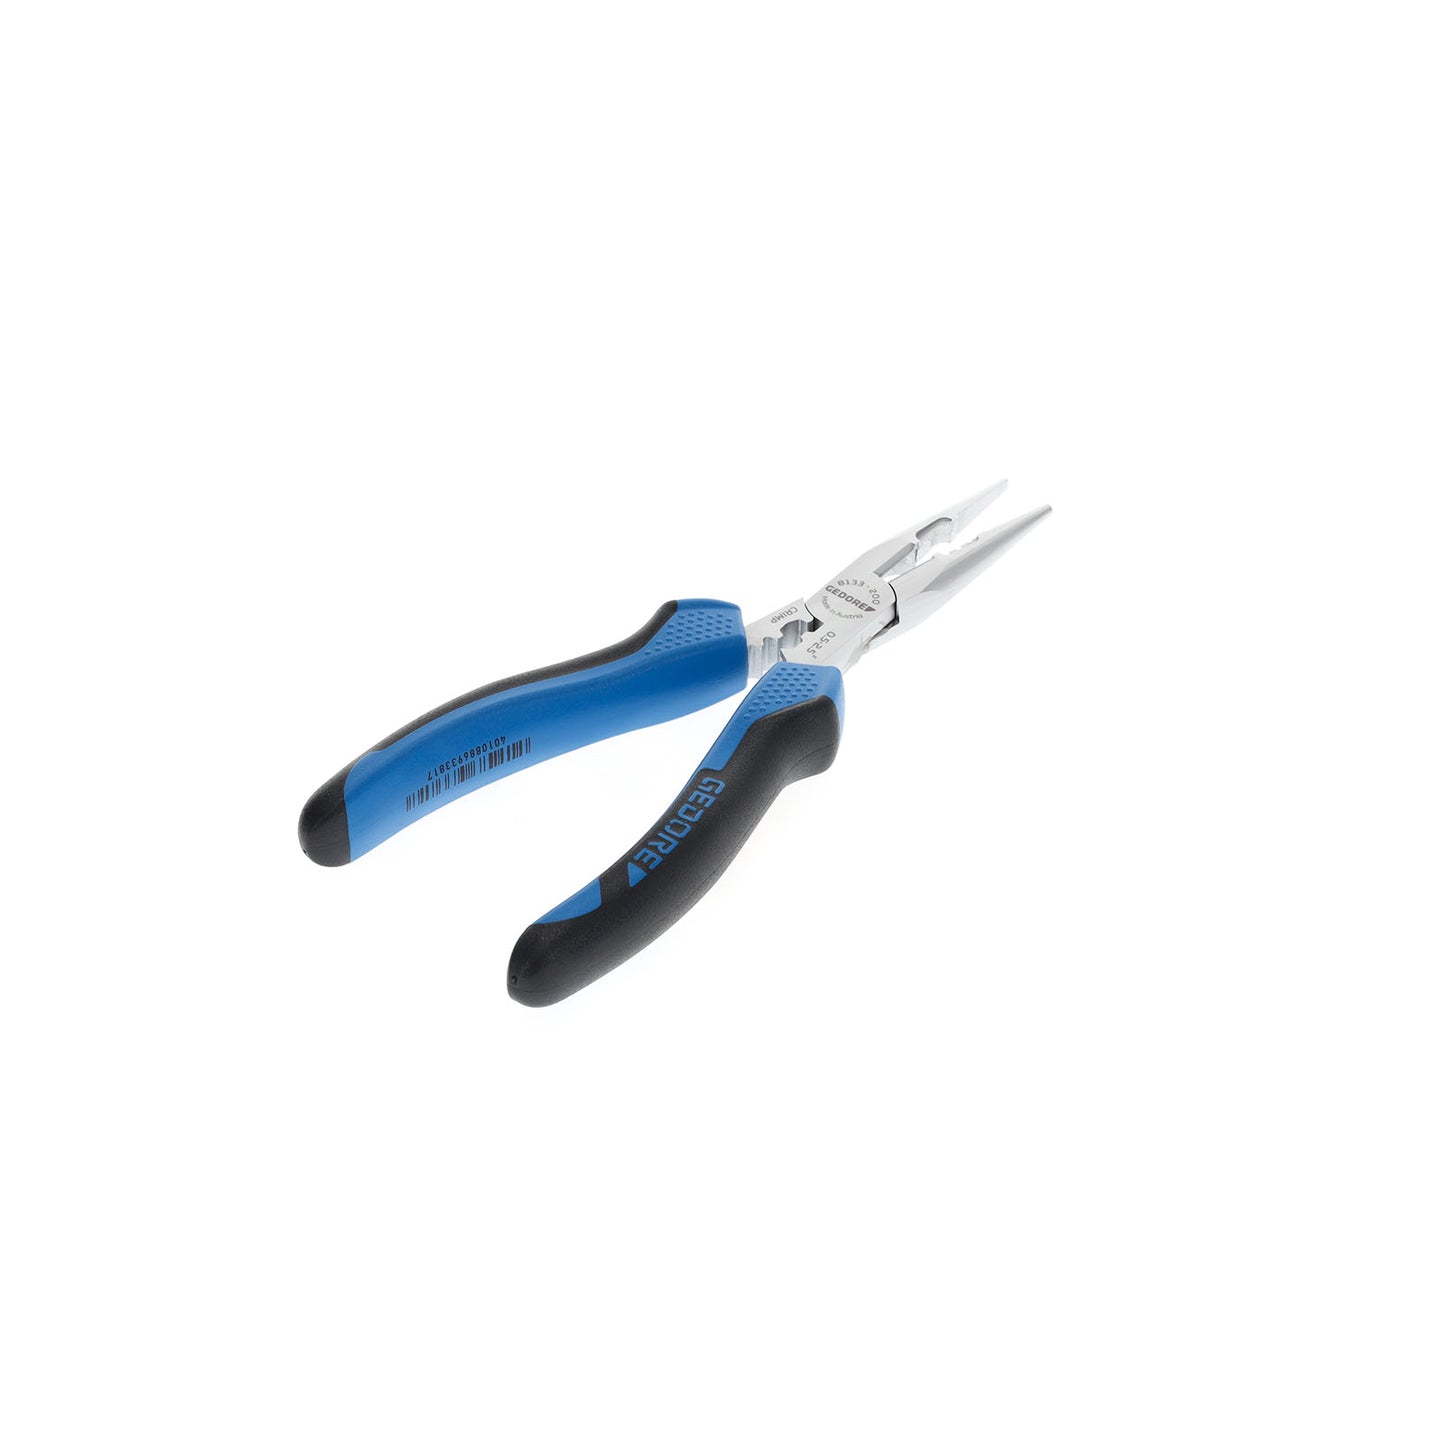 GEDORE 8133-200 JC - Triple Action Pliers 200mm (2676079)